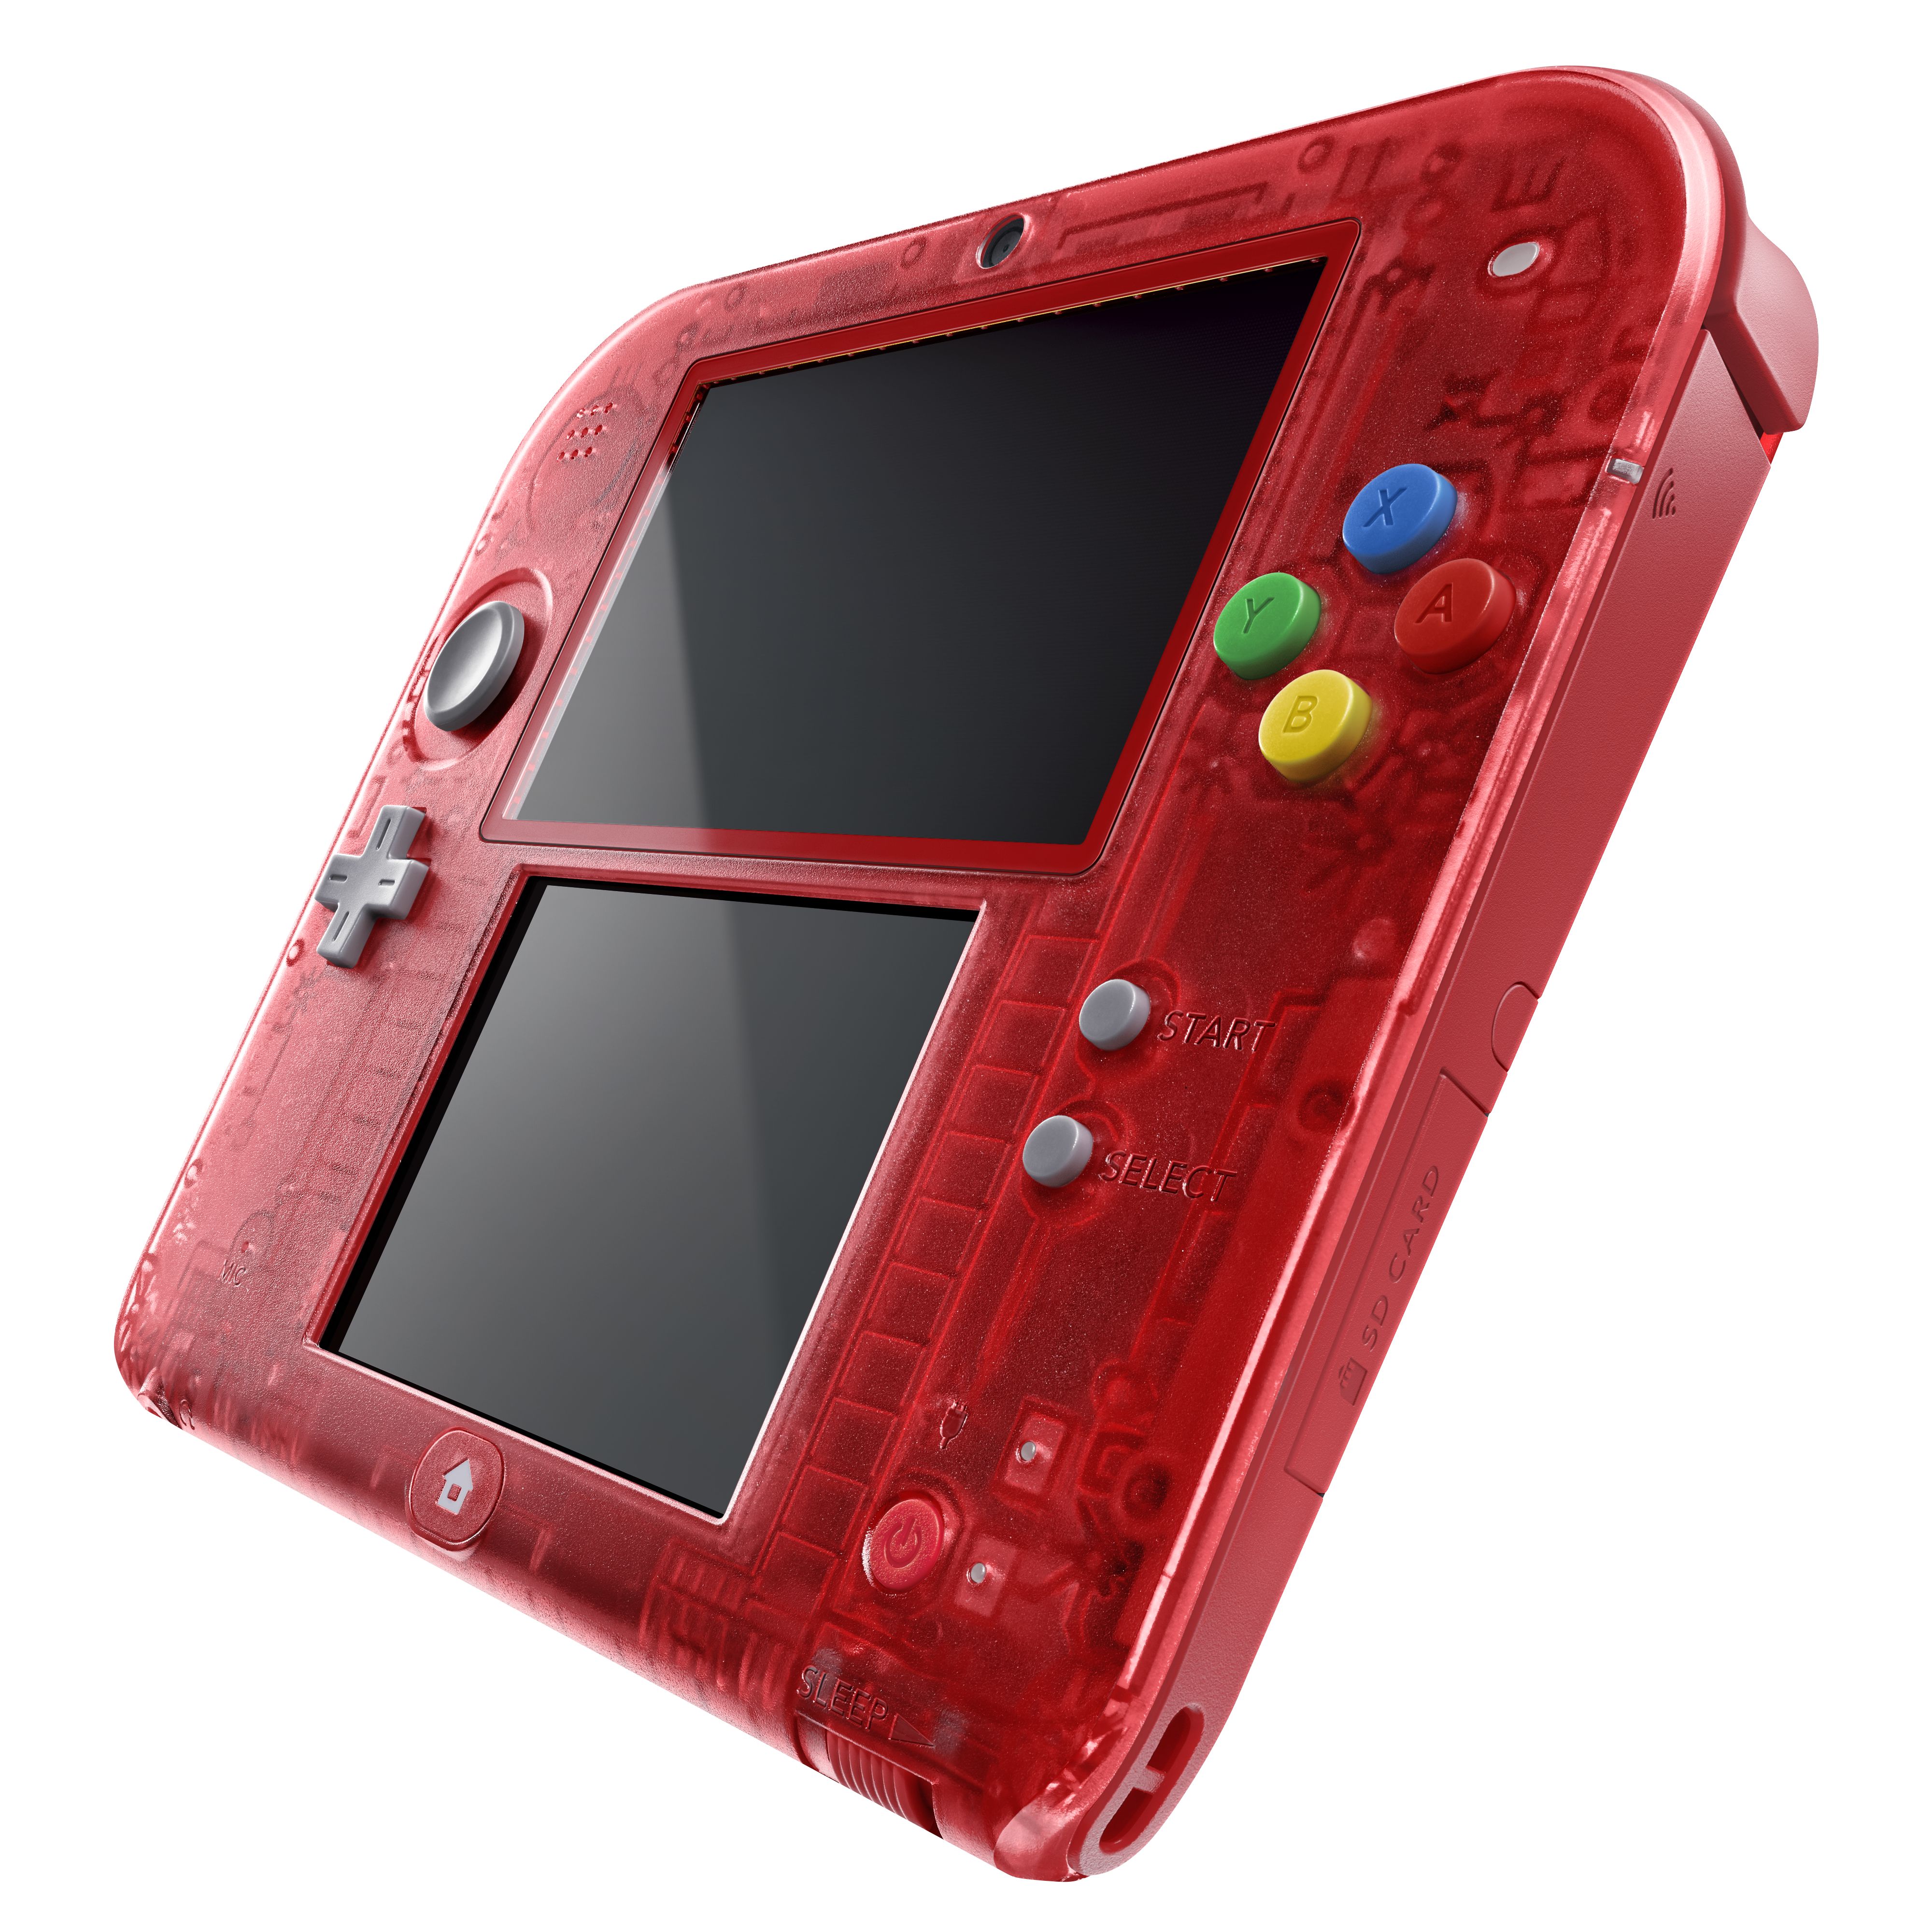 Guide: Which Nintendo 3DS or 2DS System Should I Buy? - Nintendo Life